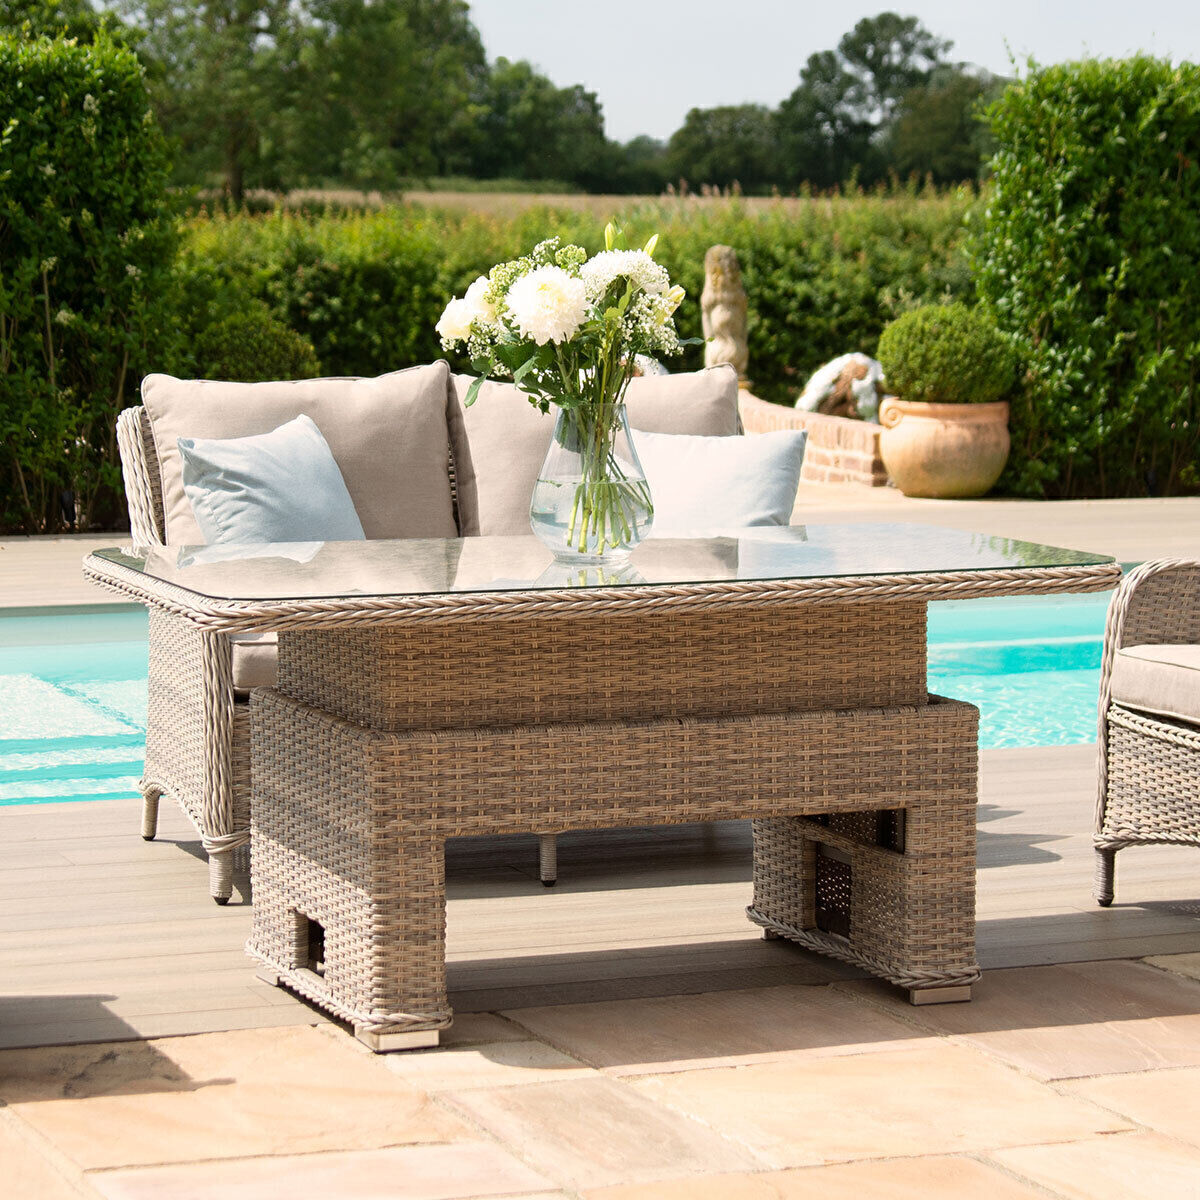 Maze - Cotswold 2 Seat Sofa Rattan Dining Set with Rising Table & Footstools product image